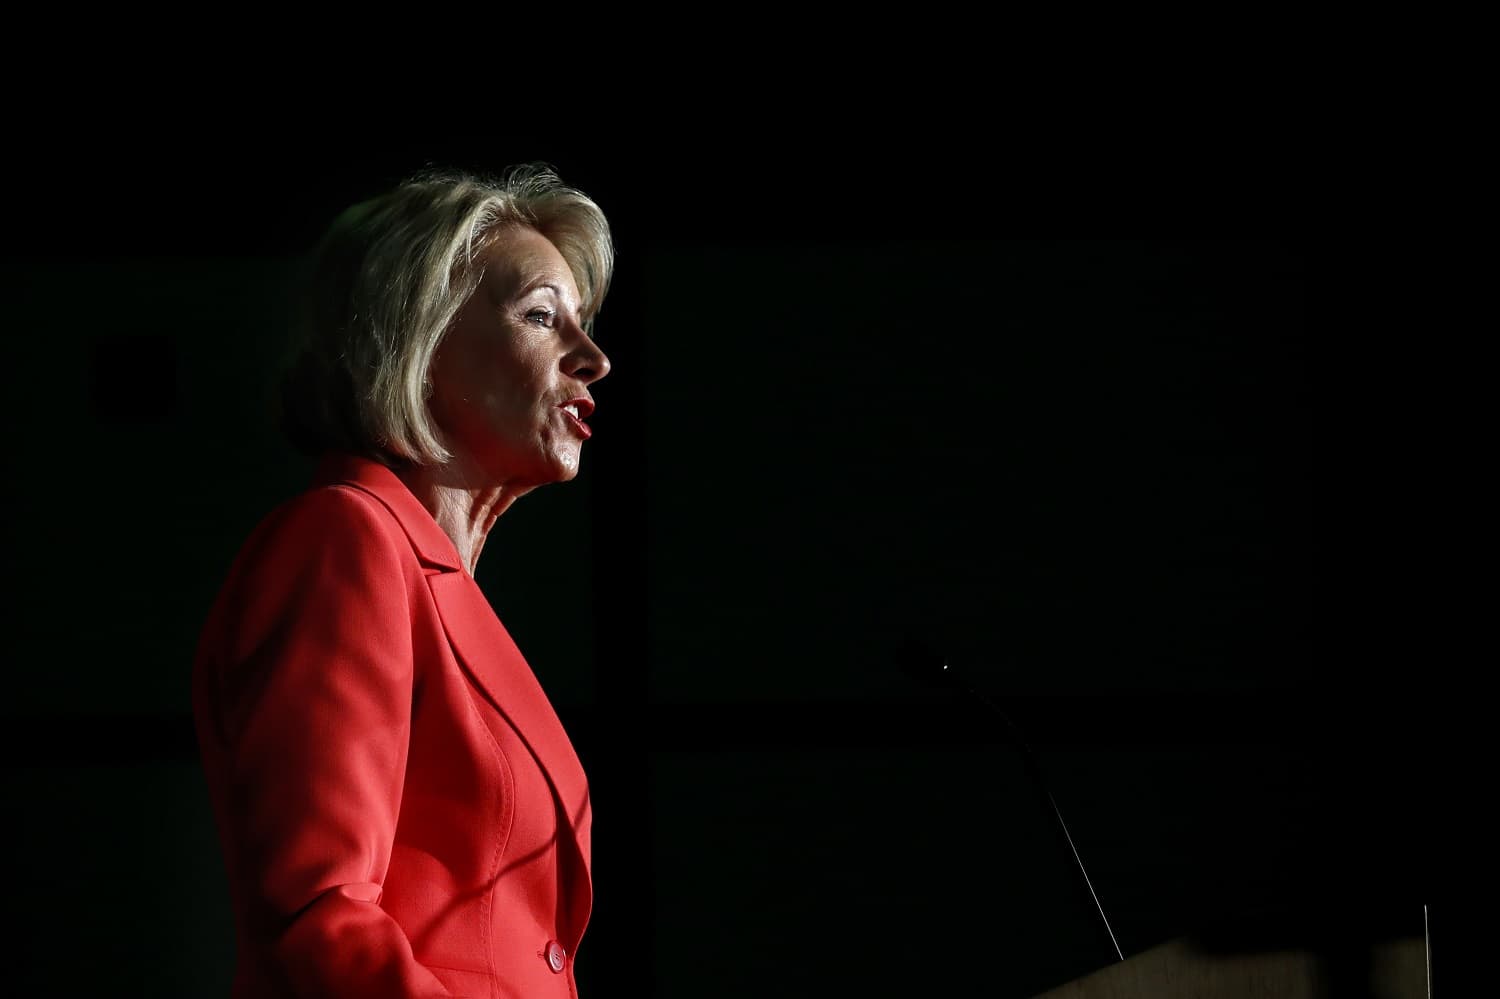 Education Secretary Betsy DeVos speaks at George Mason University Arlington, Va., campus on Sept. 7. DeVos declared that "the era of 'rule by letter' is over" as she announced plans to change the way colleges and university handle allegations of sexual violence on campus. (Jacquelyn Martin/AP)